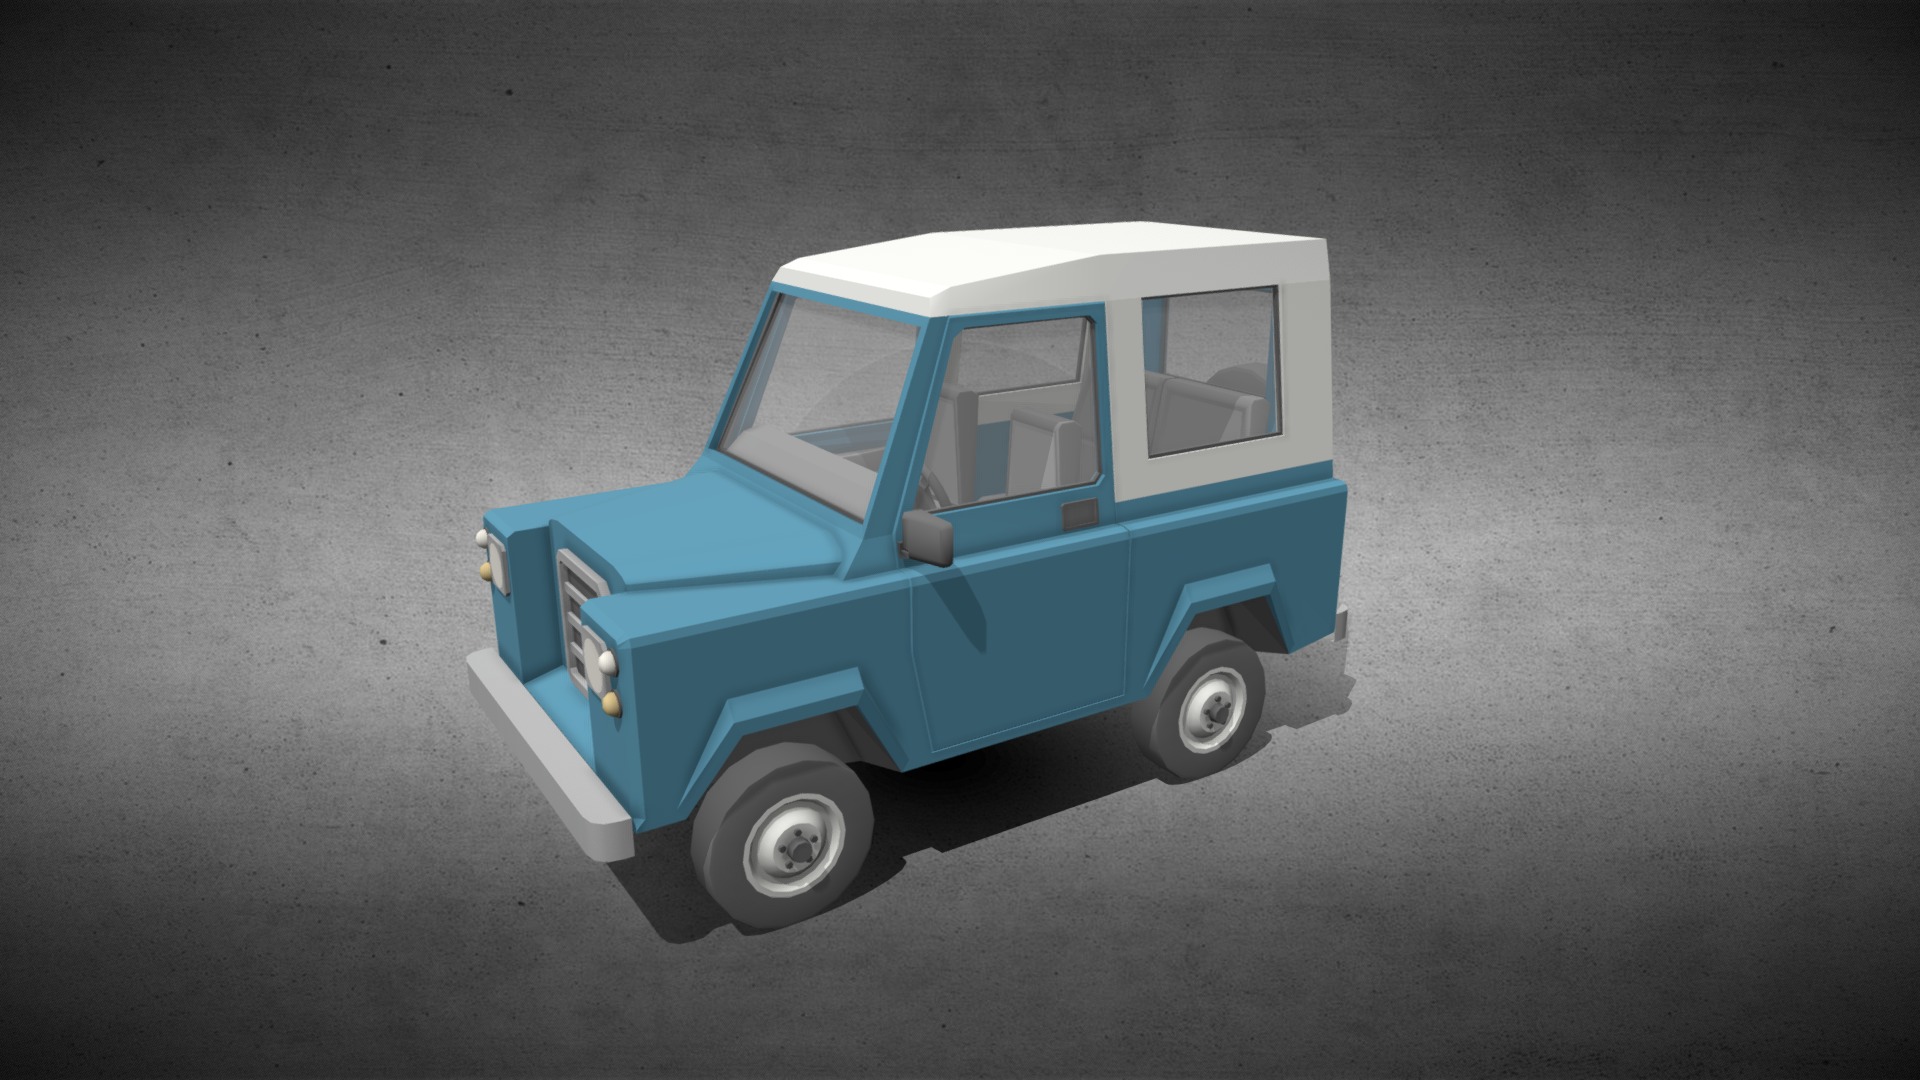 3D model Low-Poly 4×4 Car - This is a 3D model of the Low-Poly 4x4 Car. The 3D model is about a small blue car.